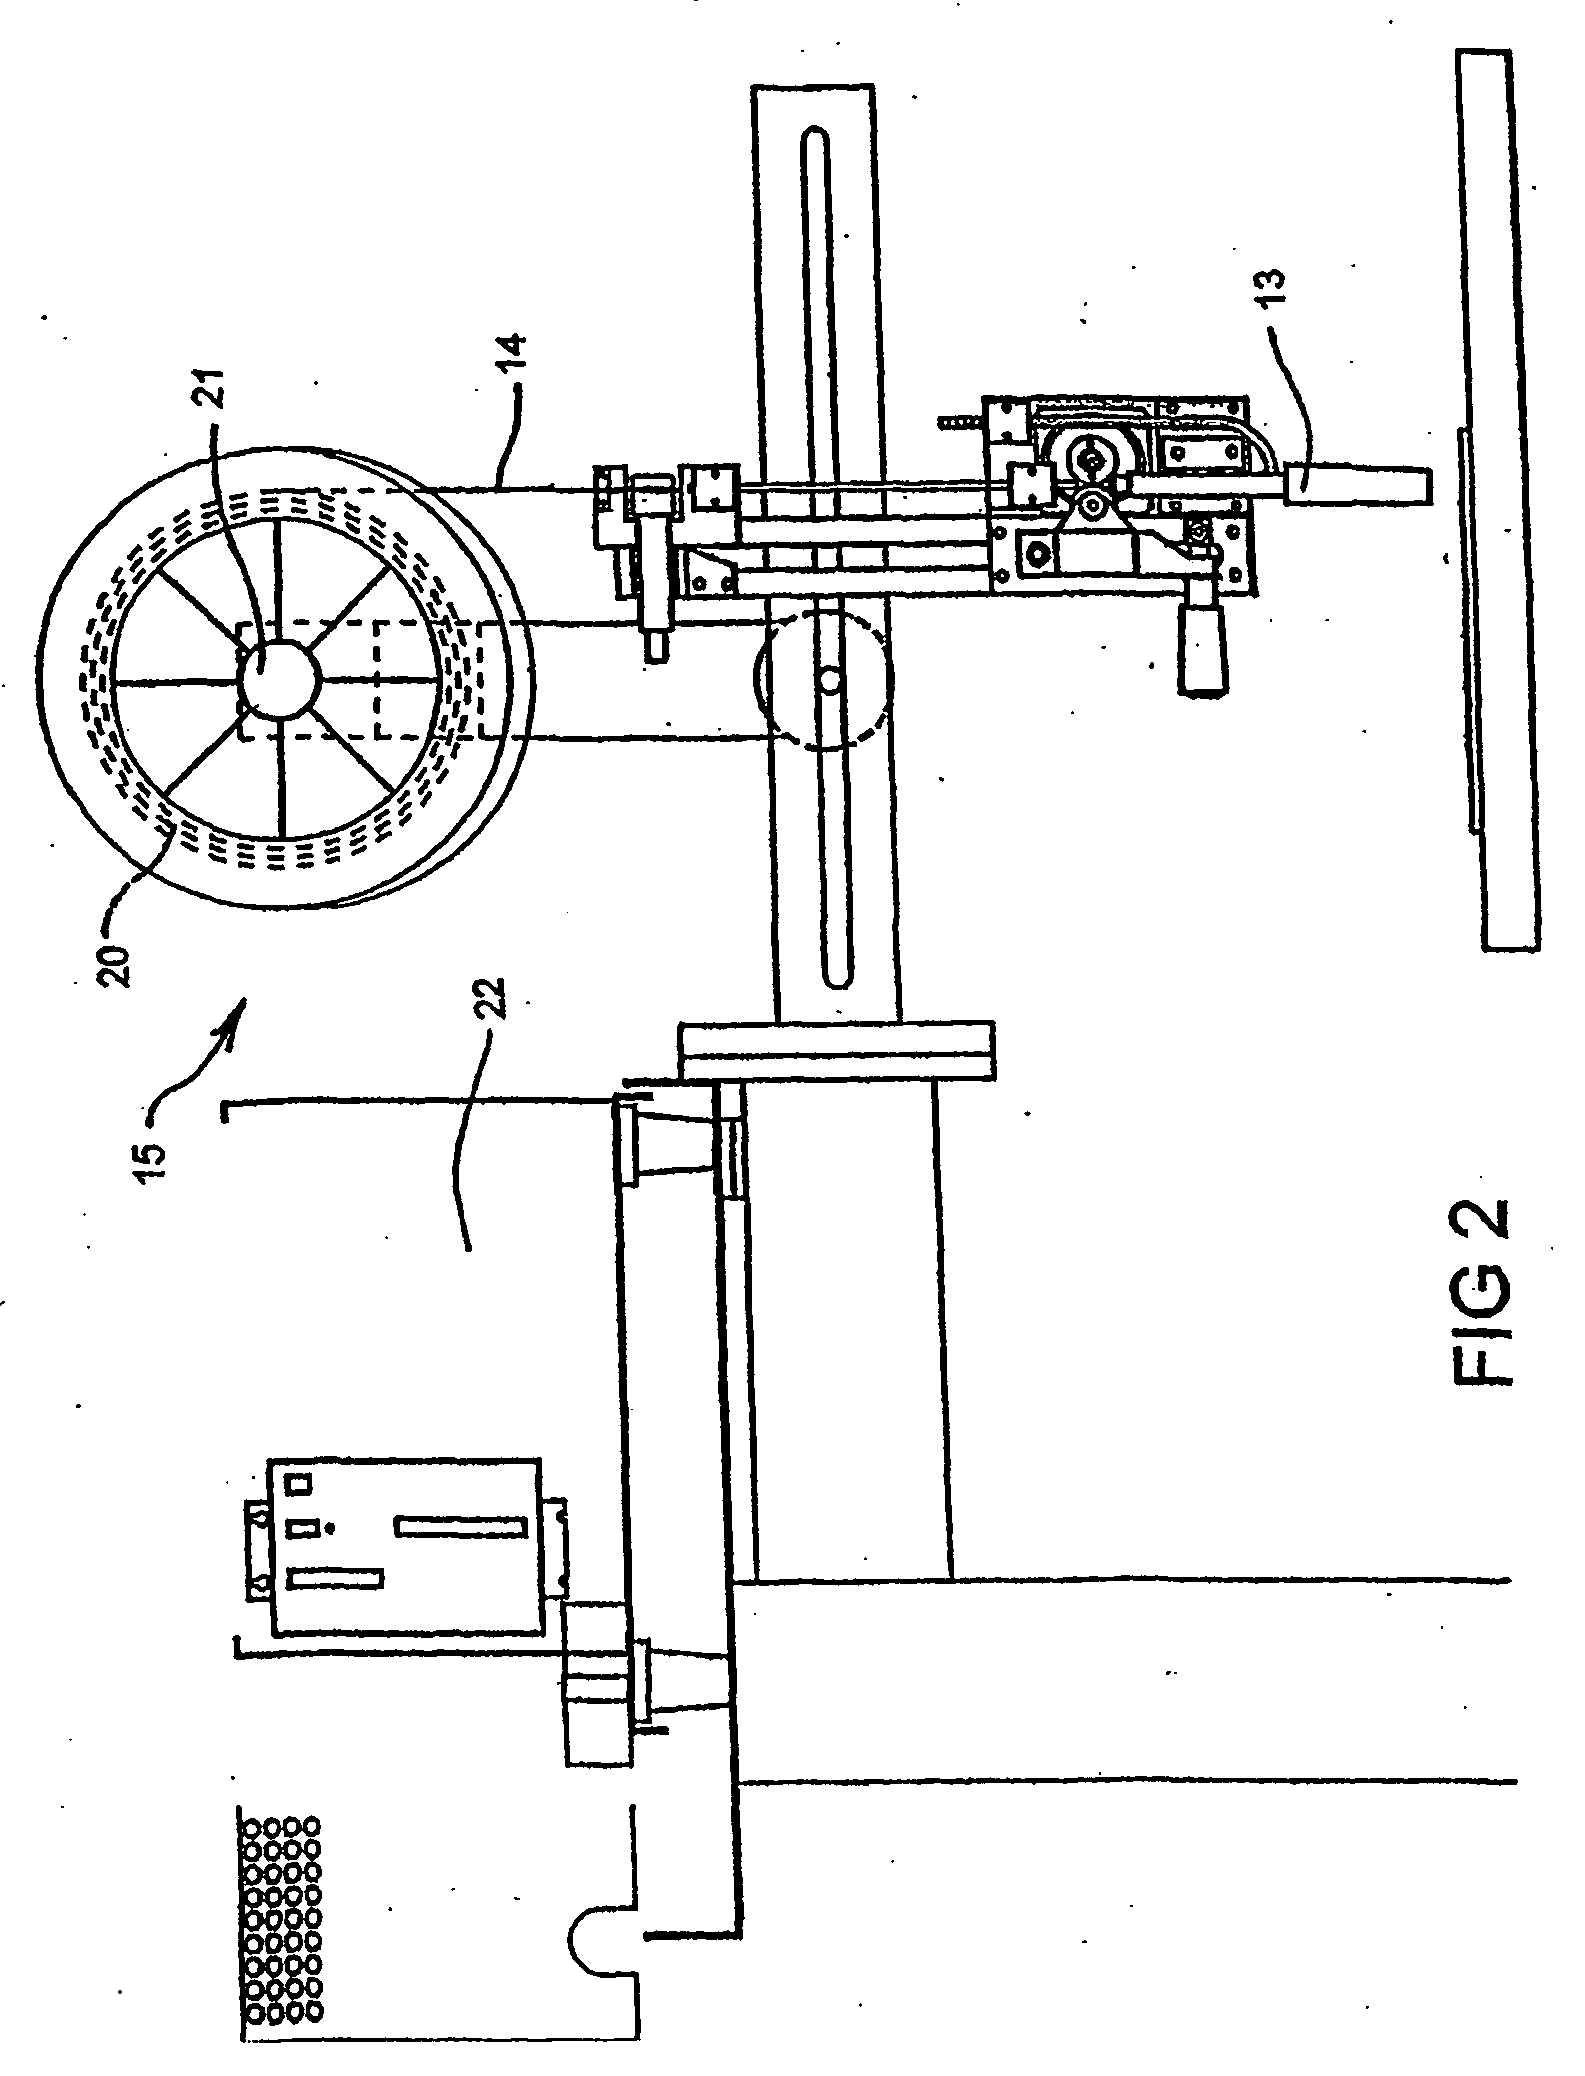 Control method and system for metal arc welding